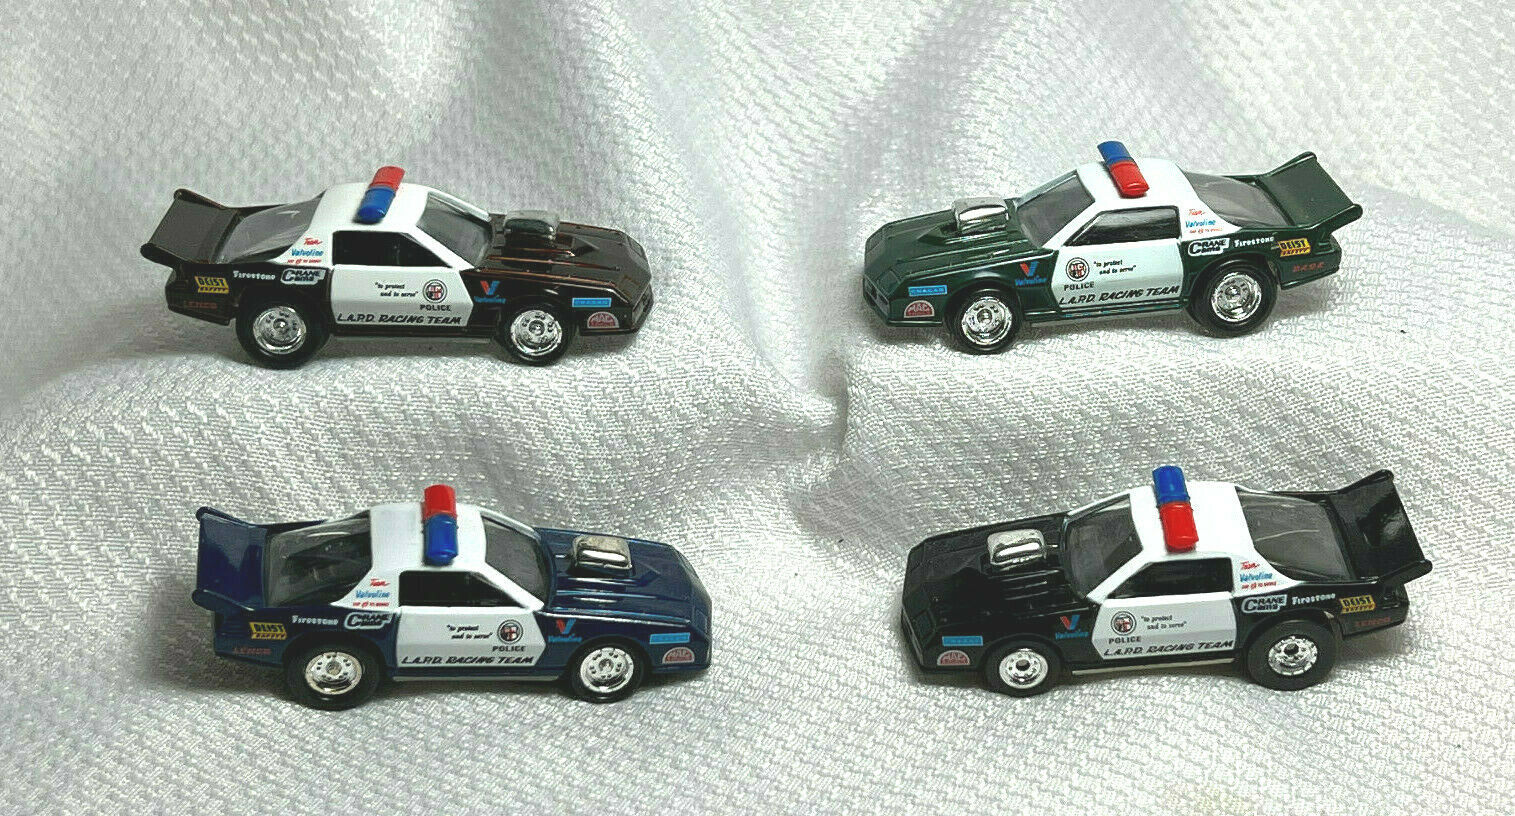 Set of 4 Johnny Lightning 1998 Police Vehicles LAPD Racing Team Diecast Toy Cars - £23.86 GBP